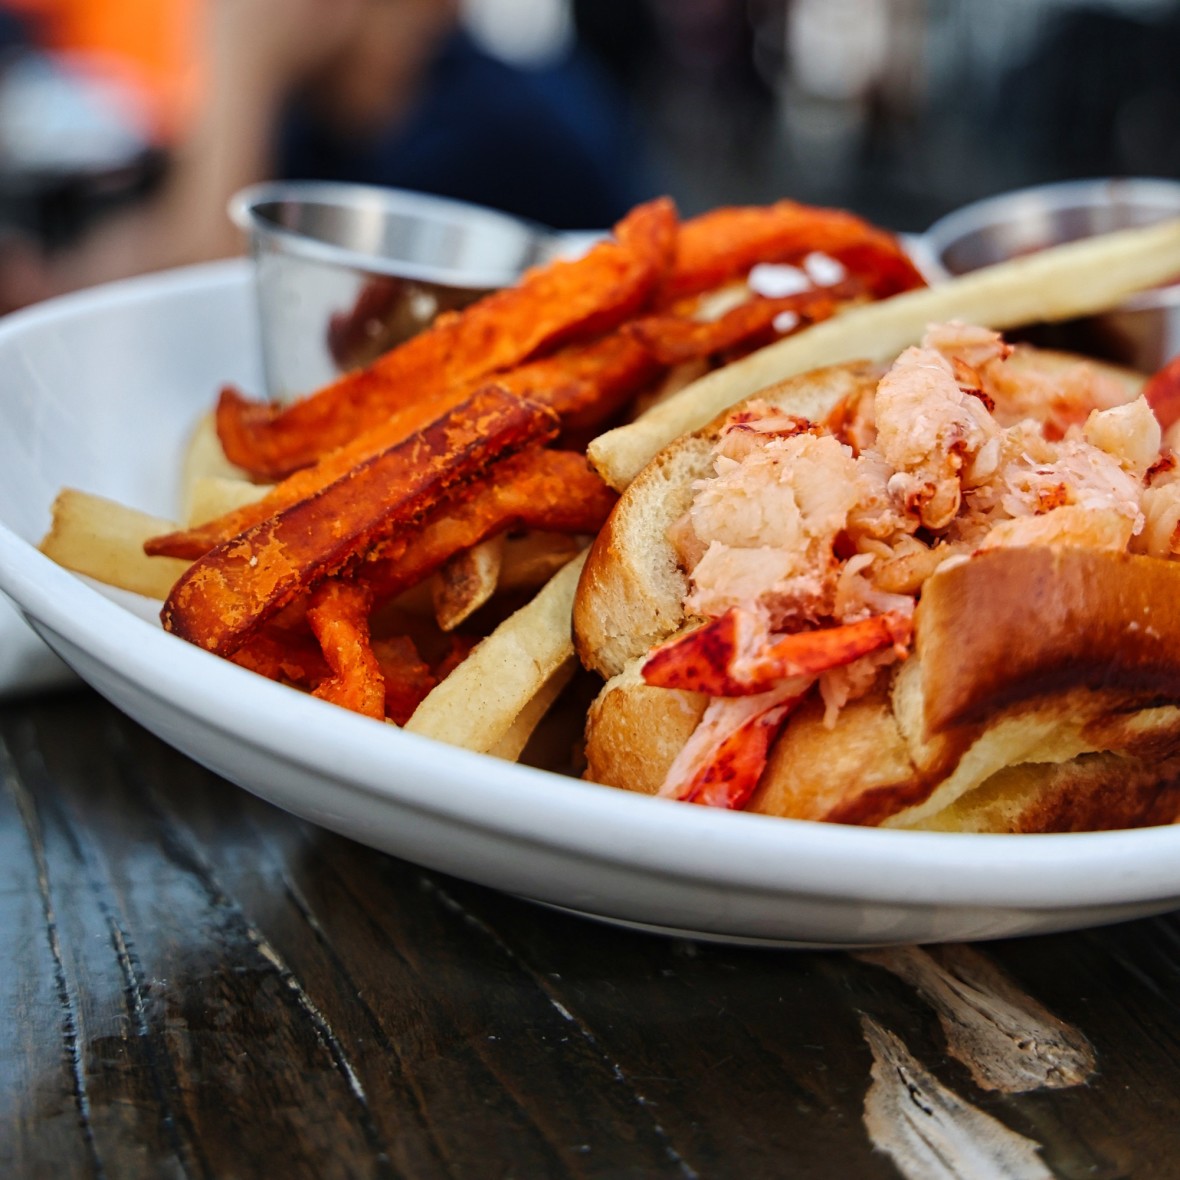 Lobster roll from Little Pub